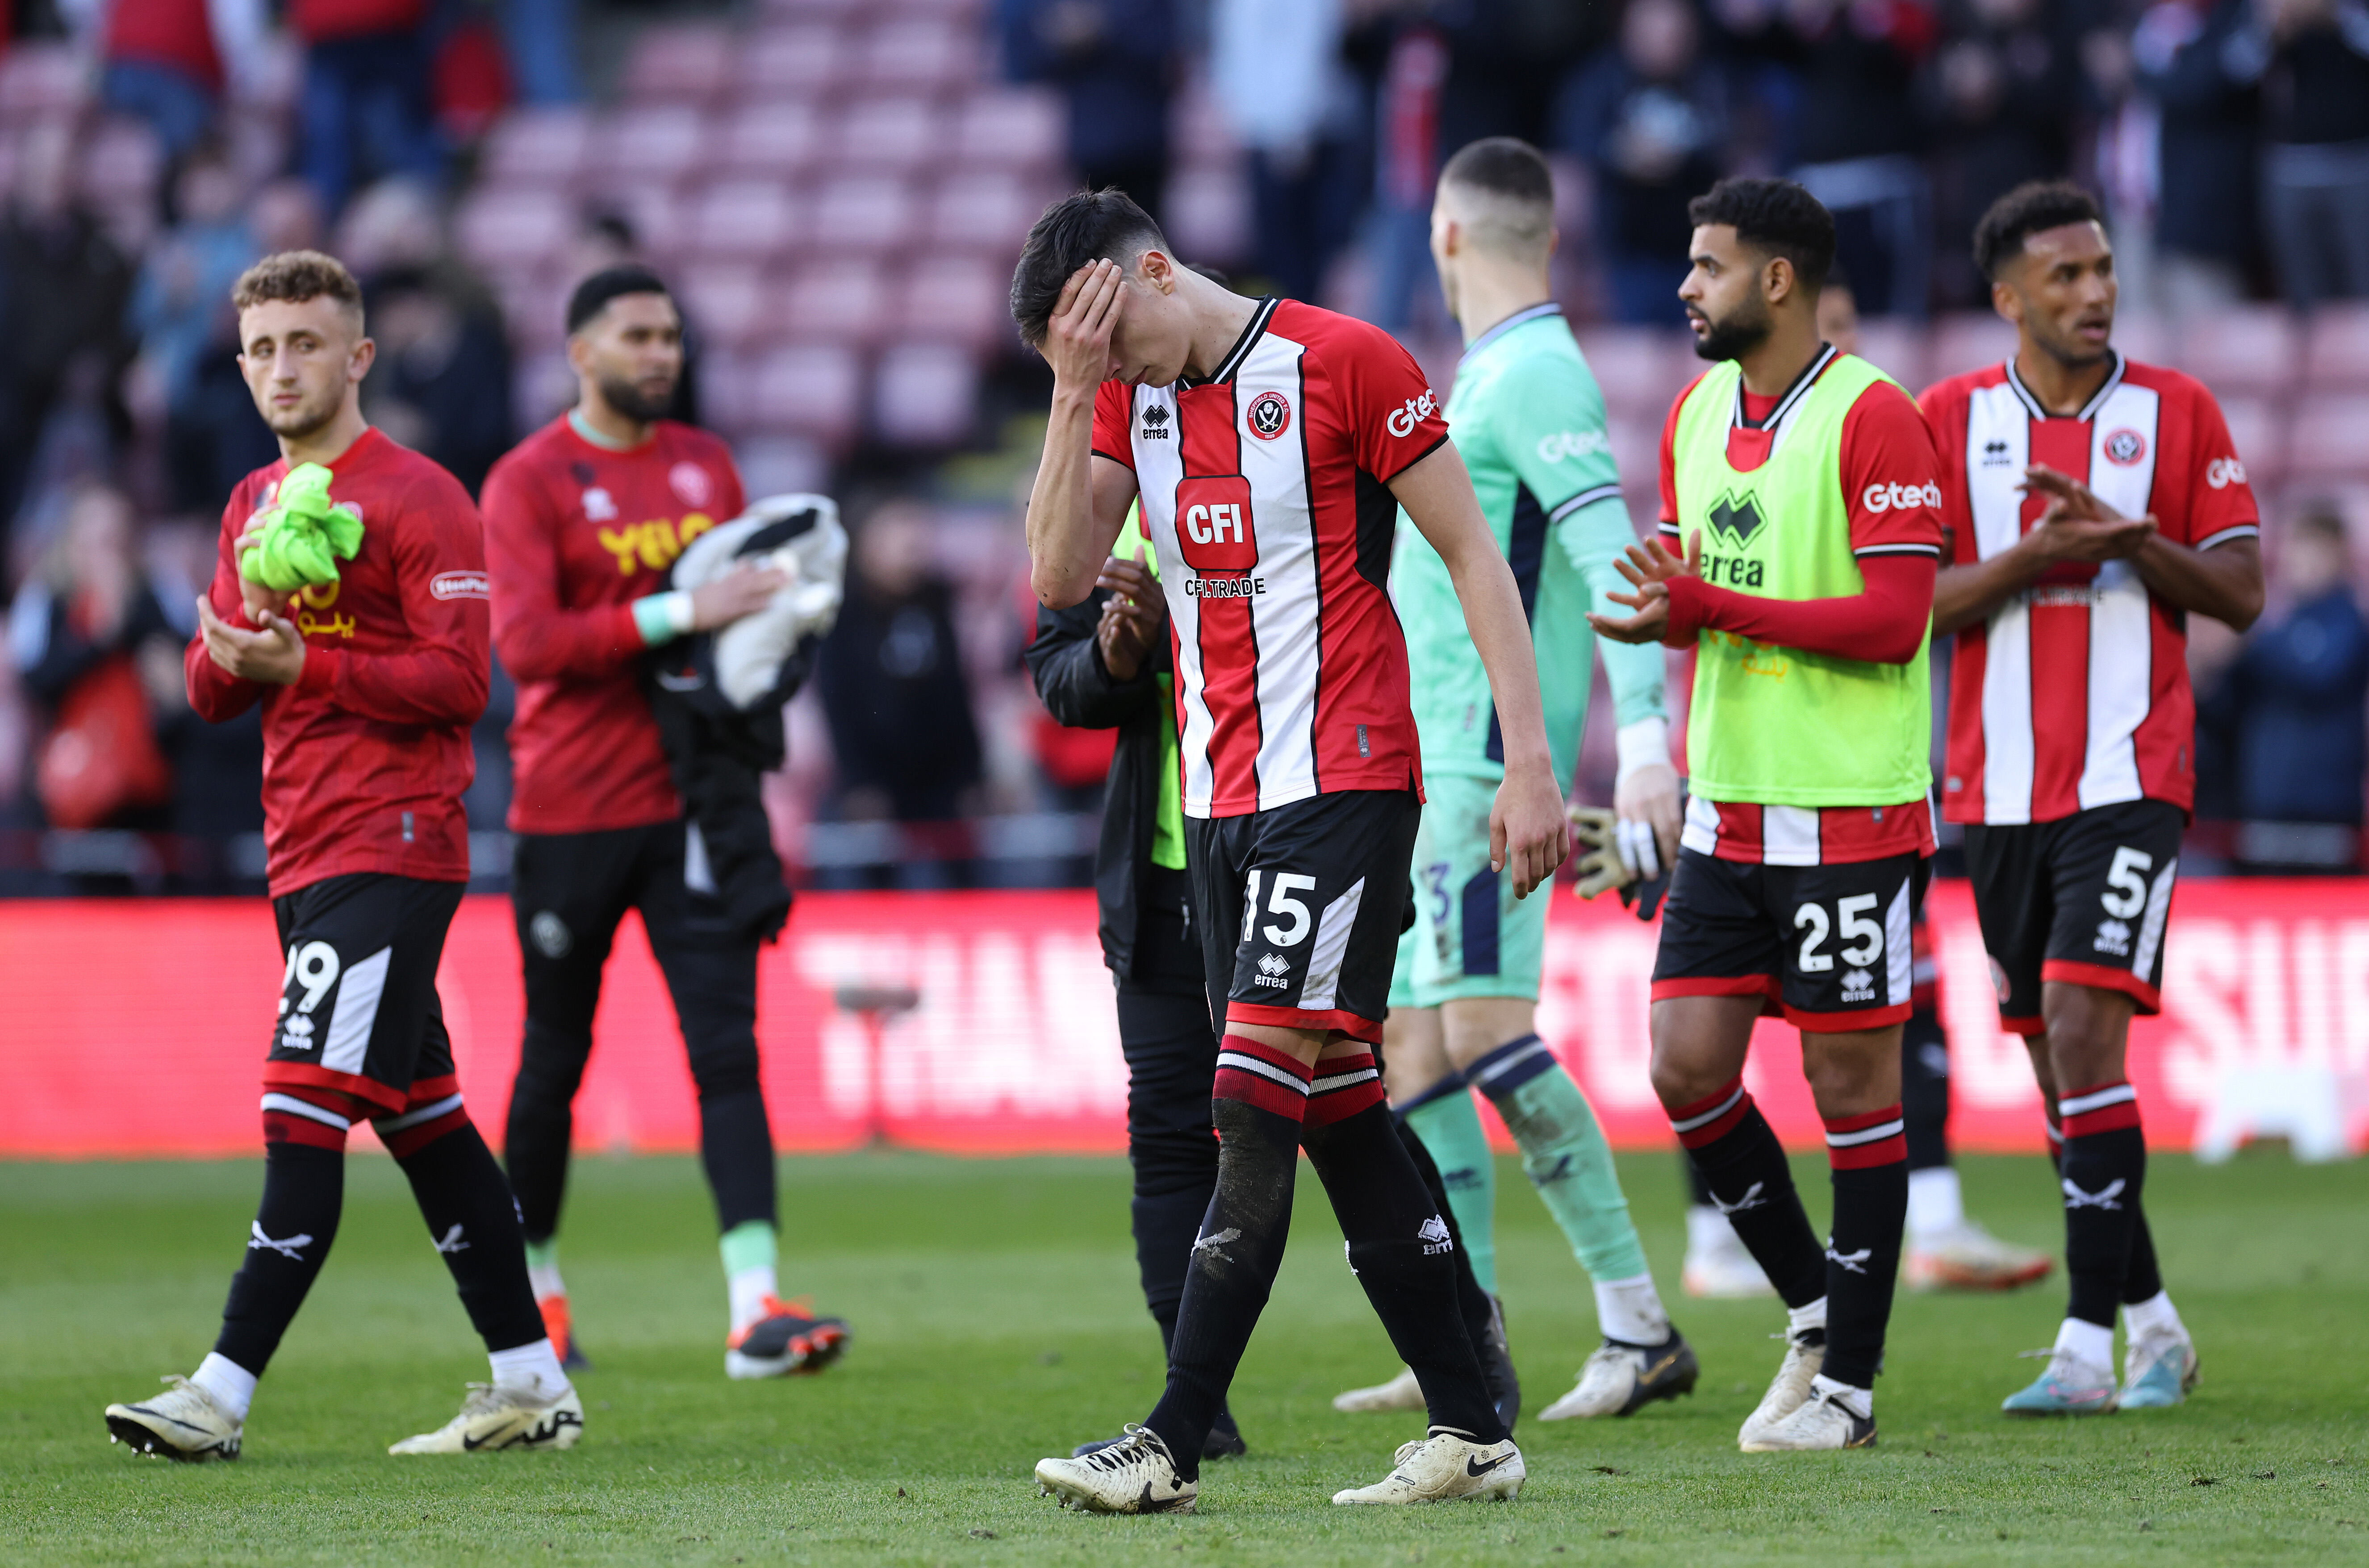 Premier League prize money revealed: How much will Sheffield United receive?